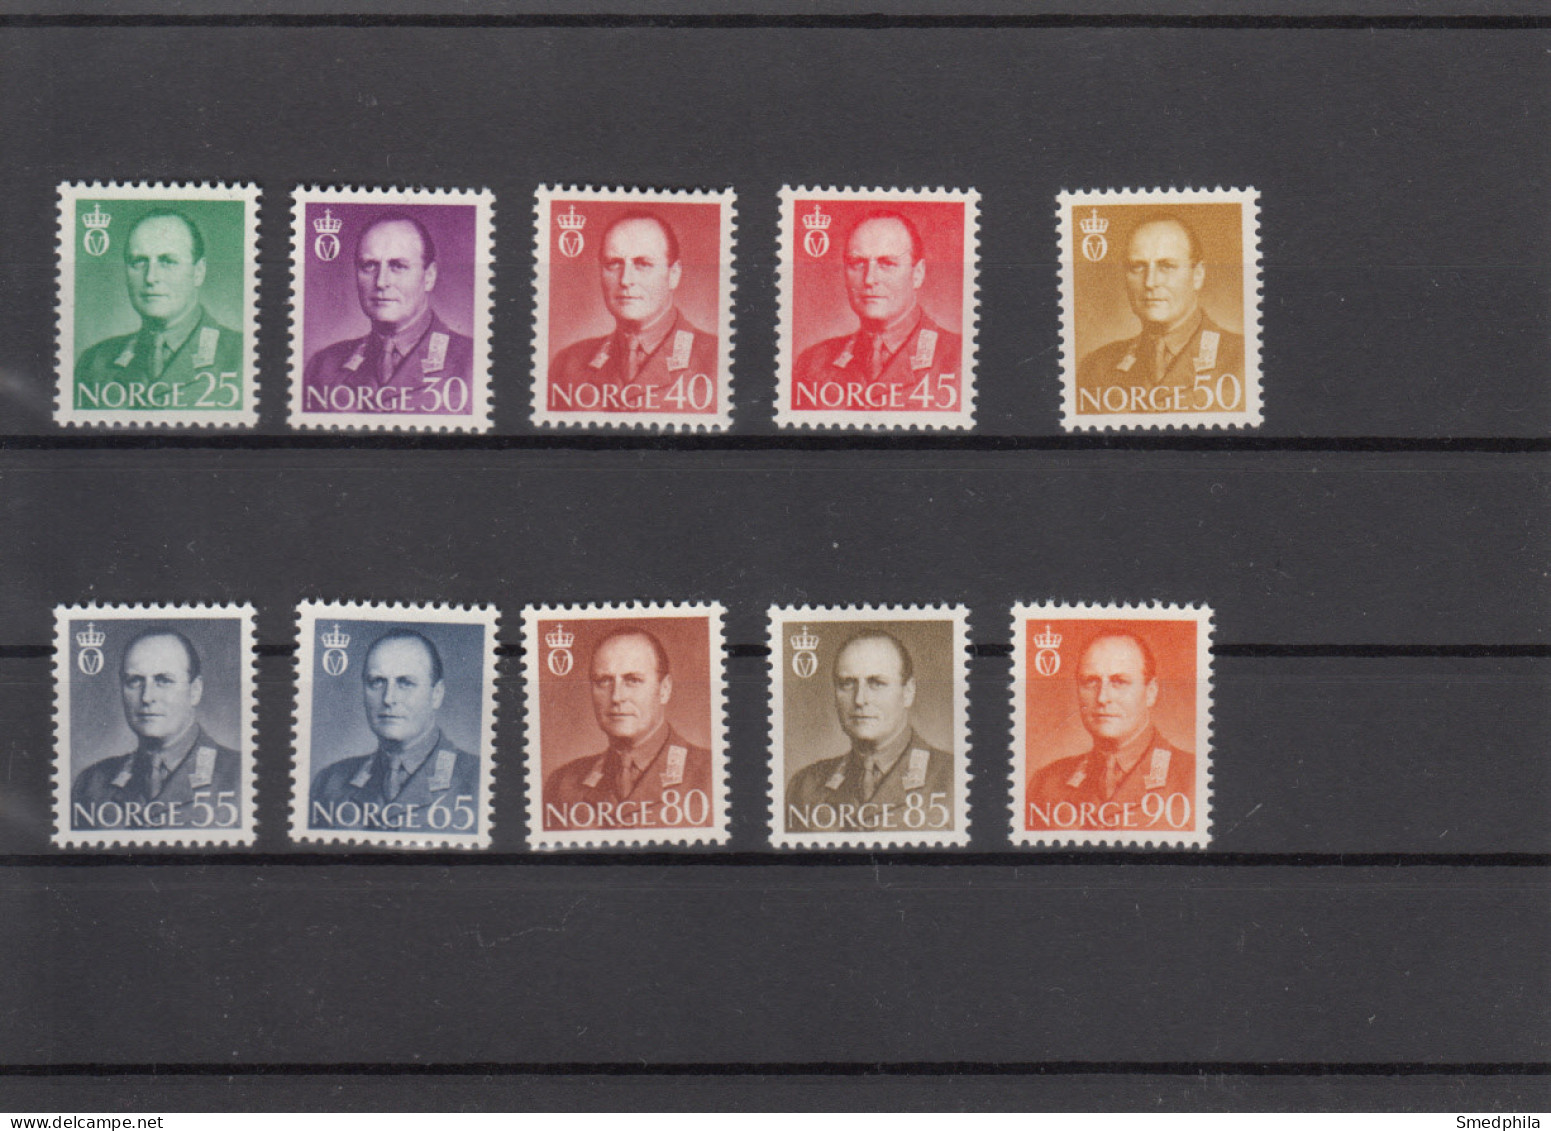 Norway 1958 - Full Year MNH ** - Años Completos